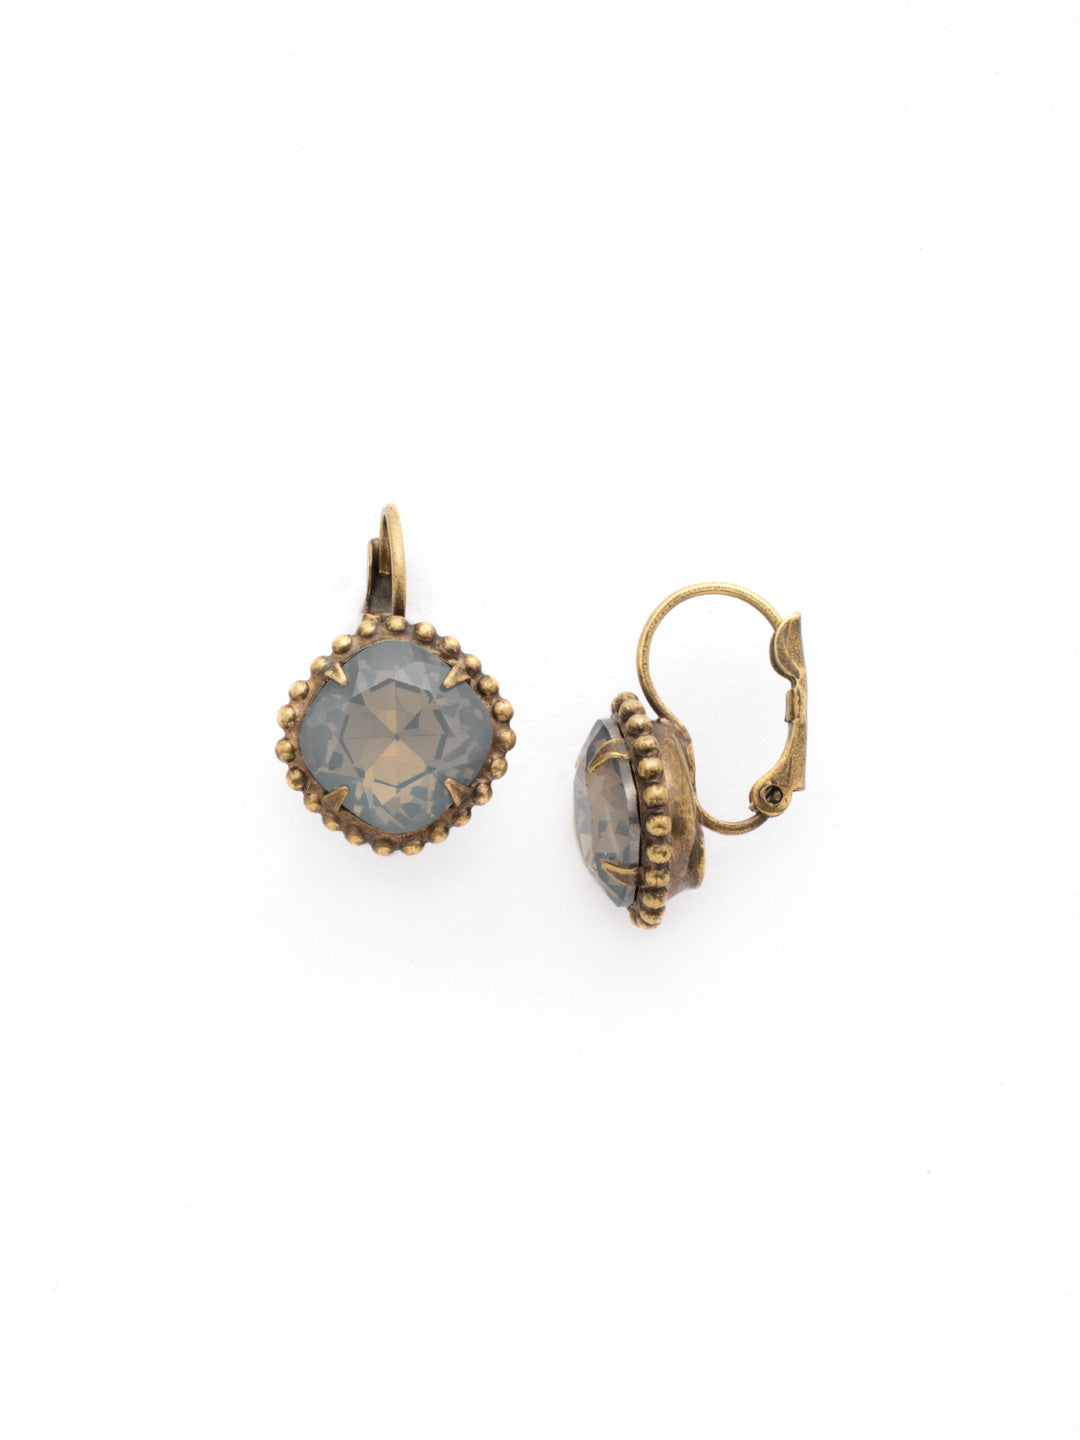 Decorative Cushion Cut French Wire Earring - EDE90AGWP - All around allure. These earrings feature a rounded-edge, cushion cut stone that is encircled by a vintage inspired decorative edged border. French wire ensures accessible, everyday wear.